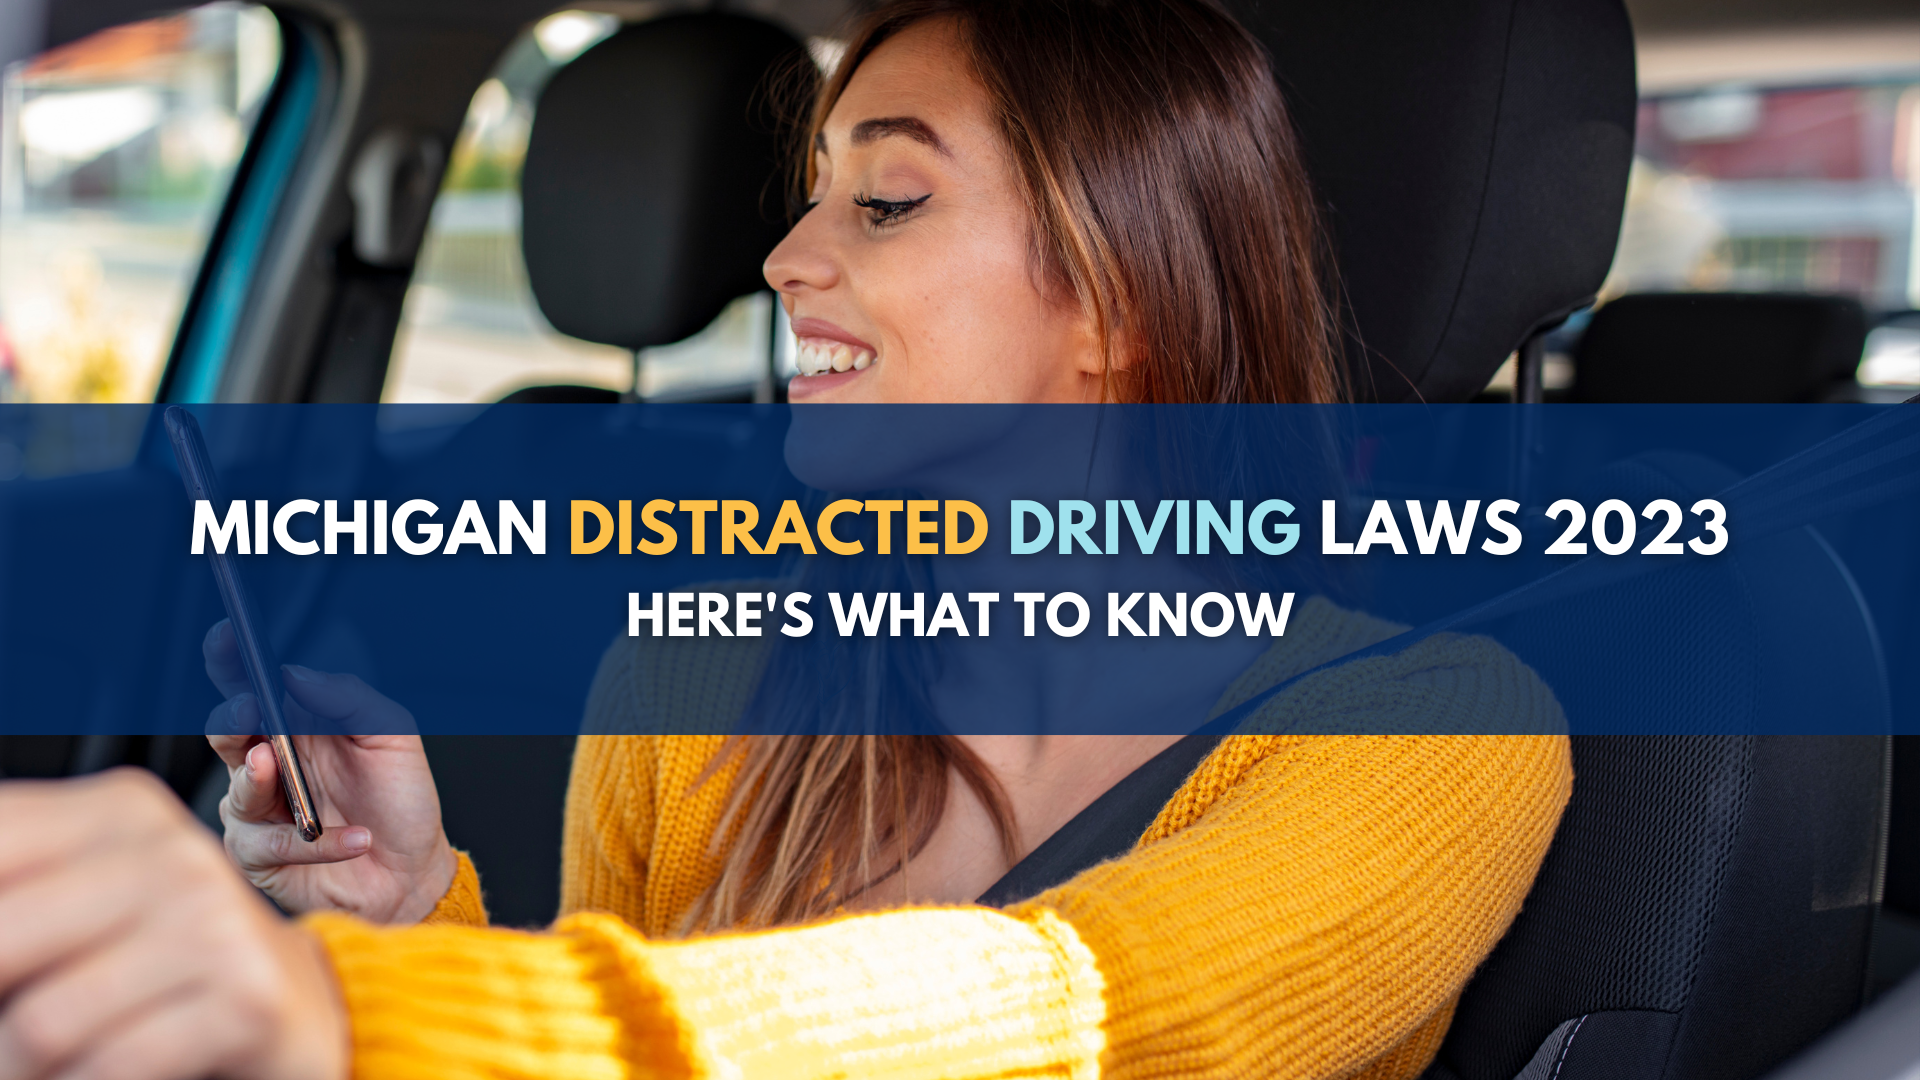 Michigan Distracted Driving Laws 2023: Here's what to know